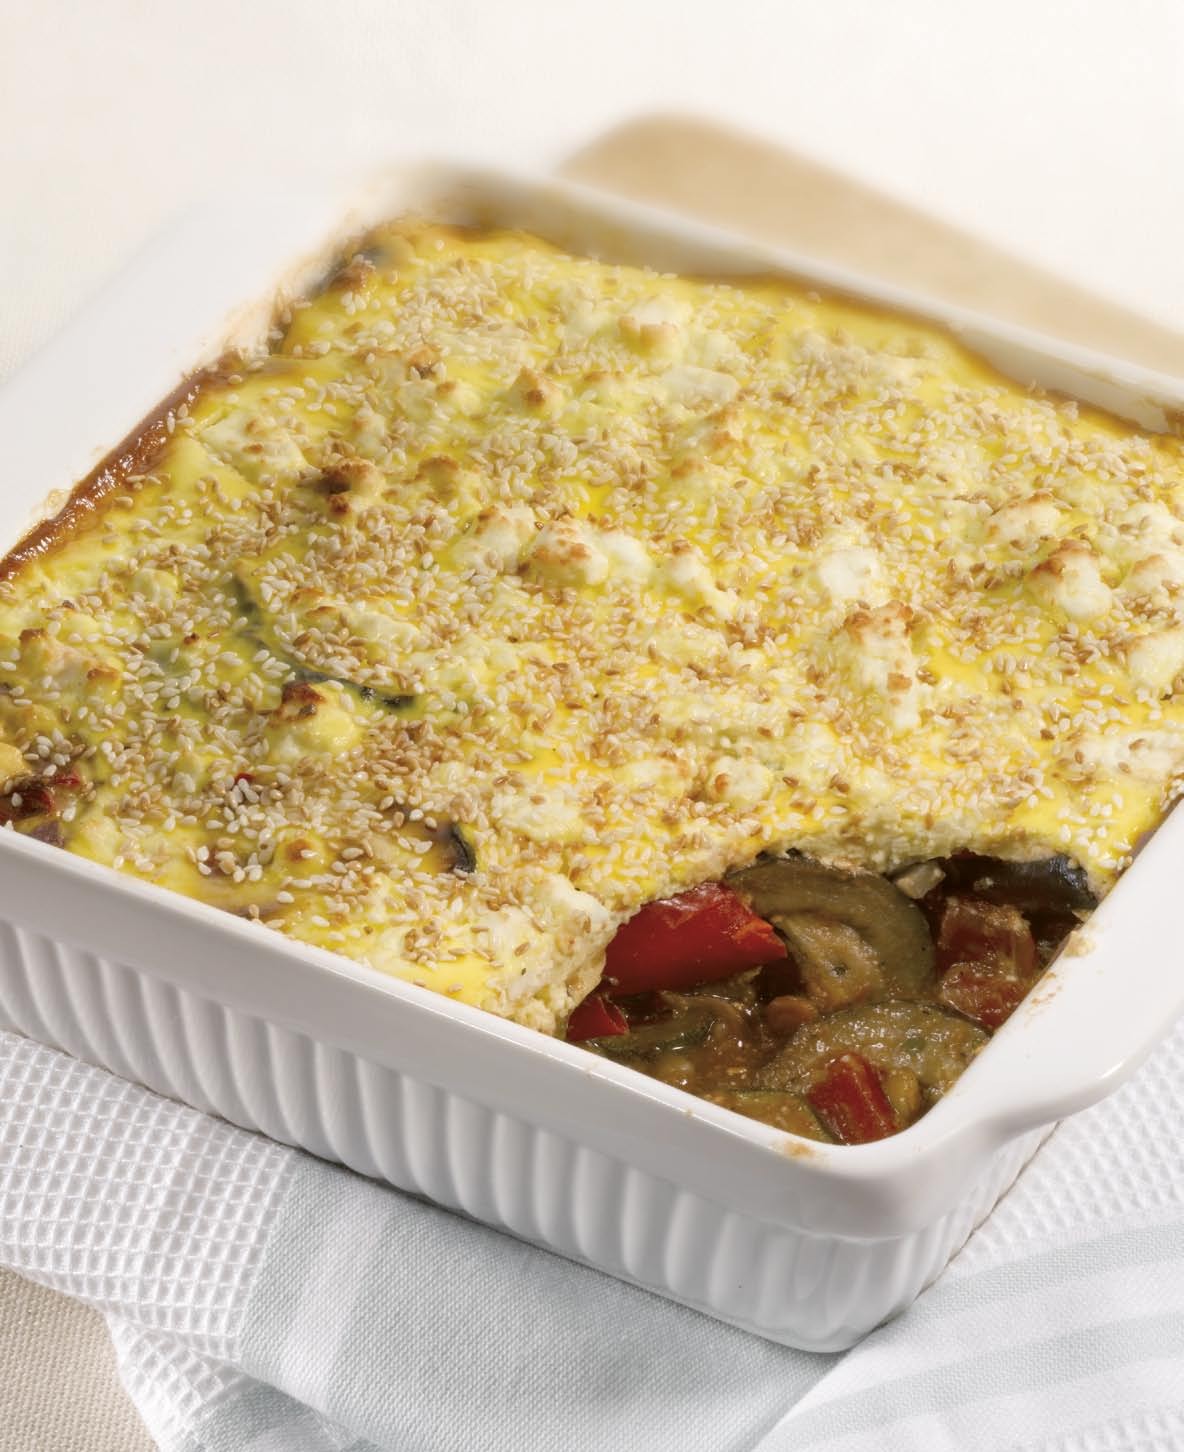 What's Cooking?: Vegetable moussaka